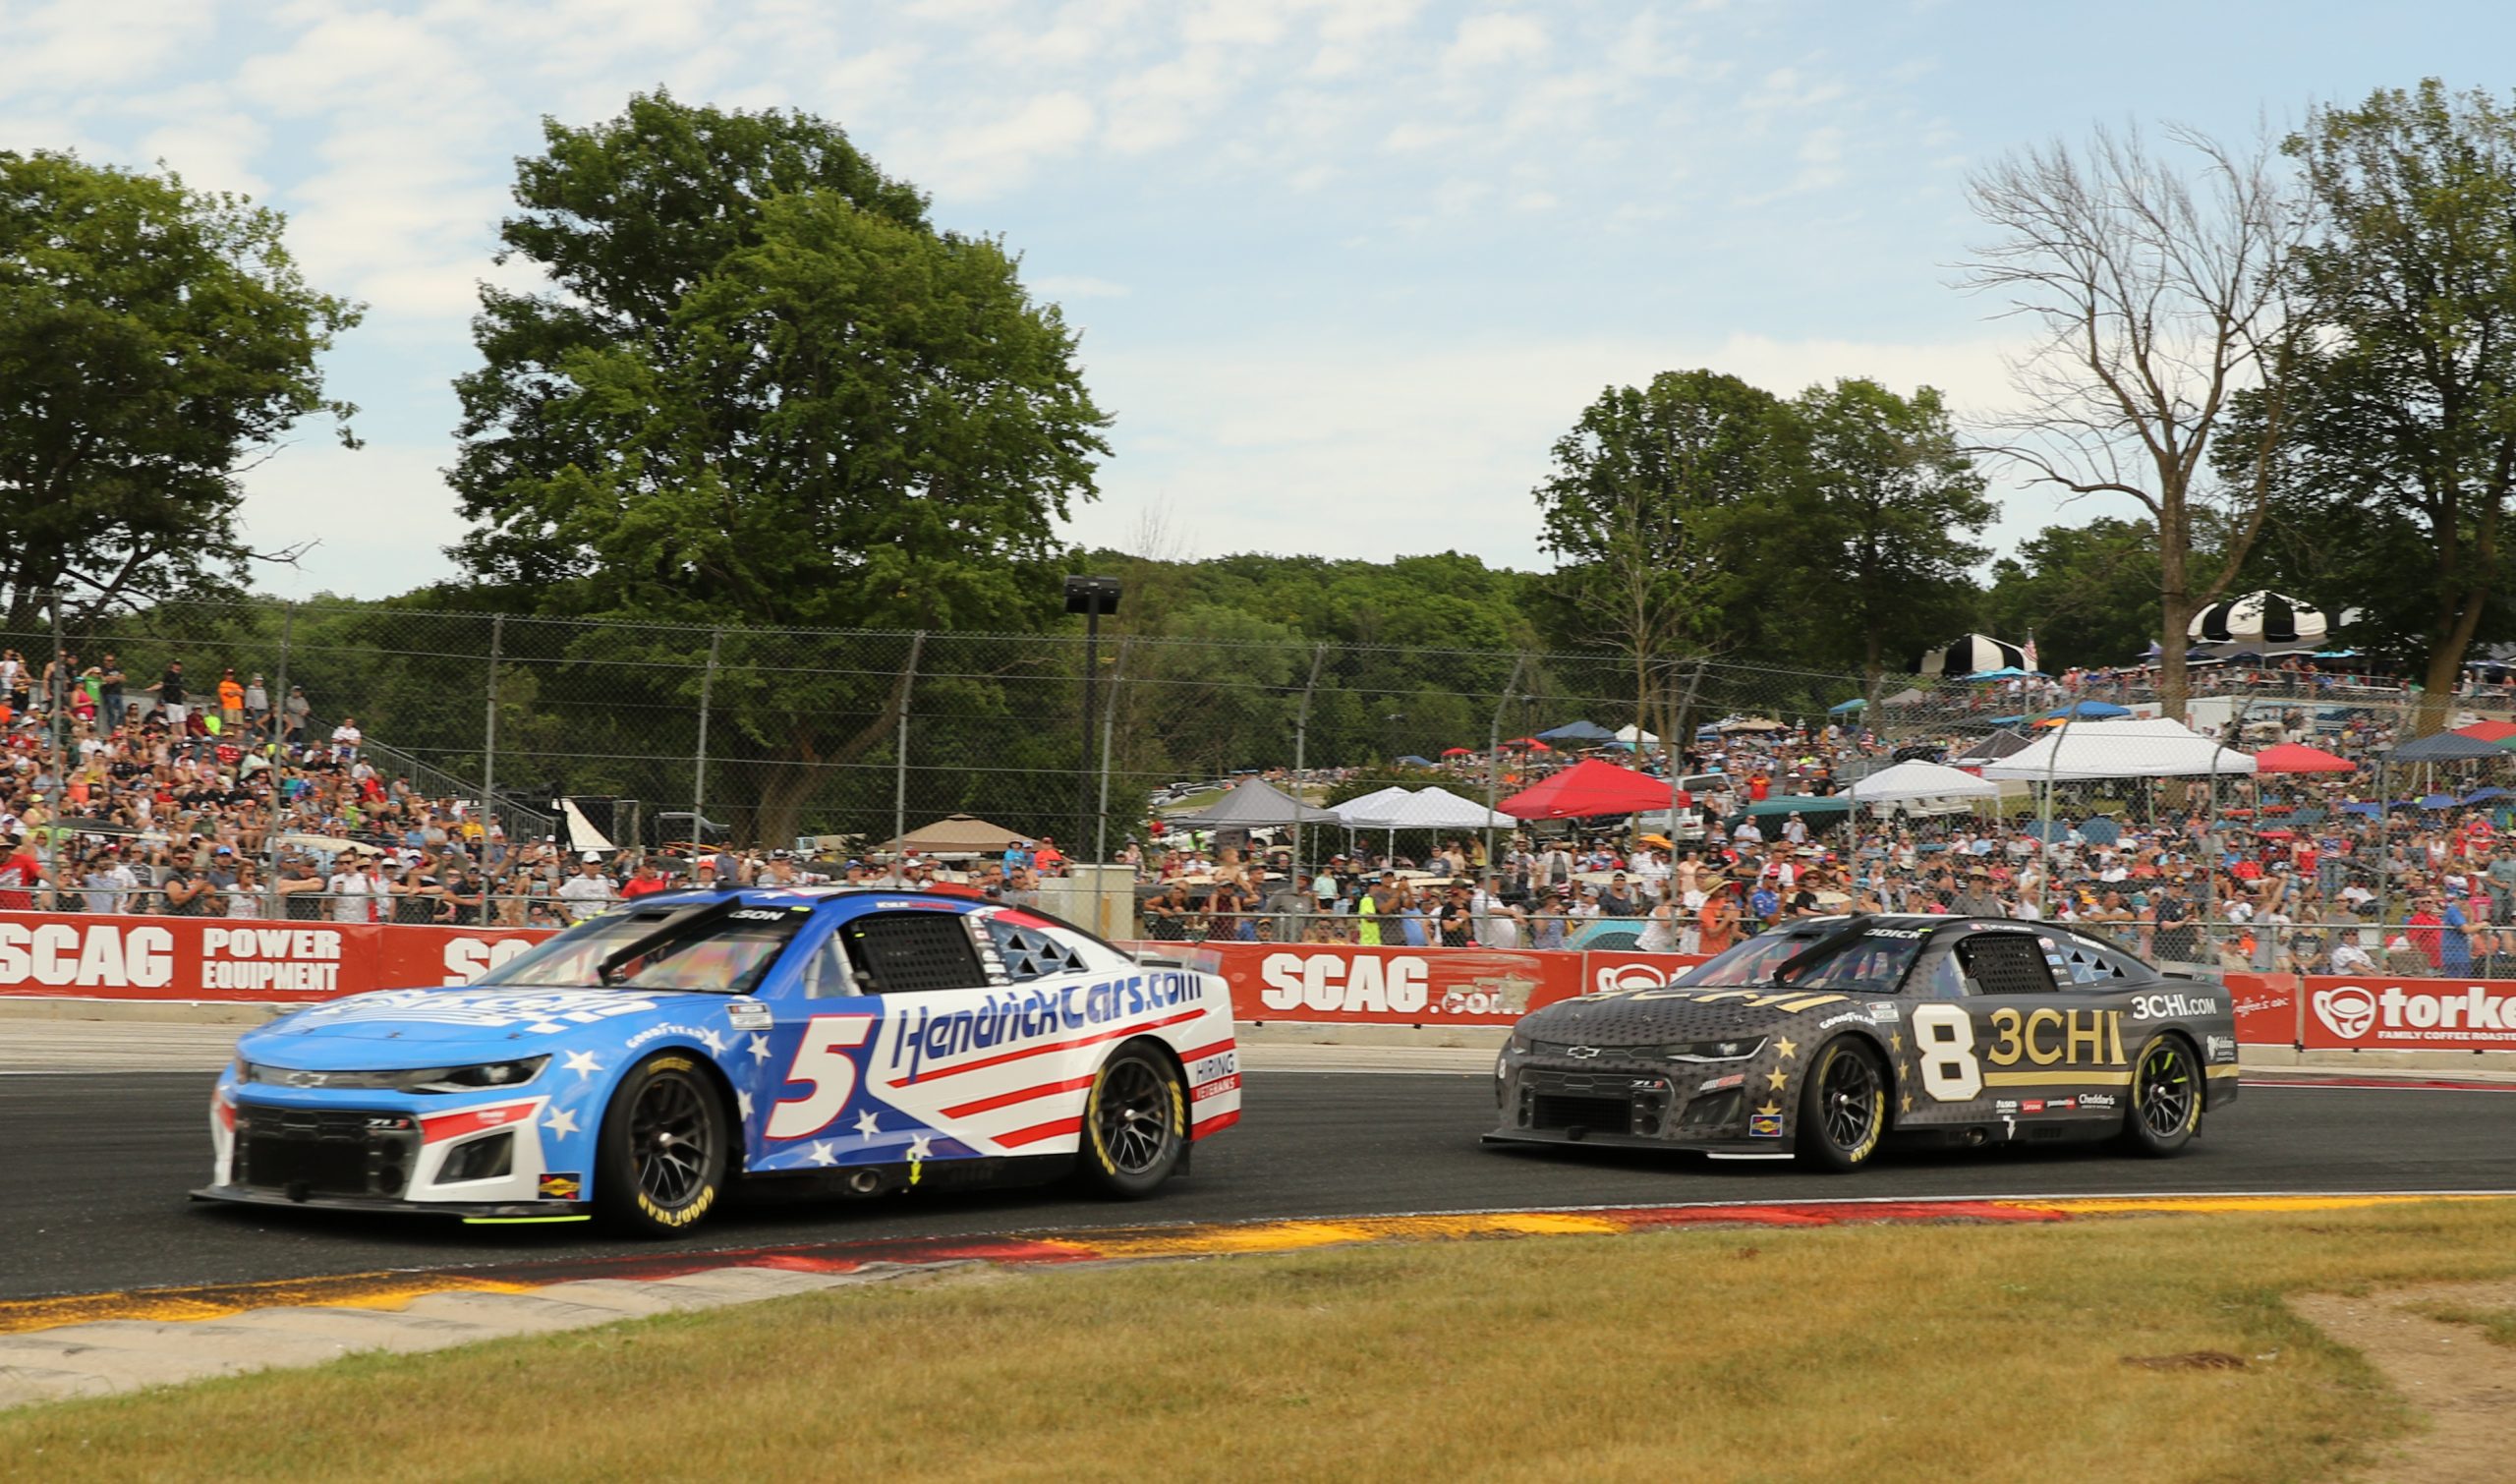 In the early going, Larson seemed to match Reddick's pace. (Photo: Mike Moore | The Podium Finish)